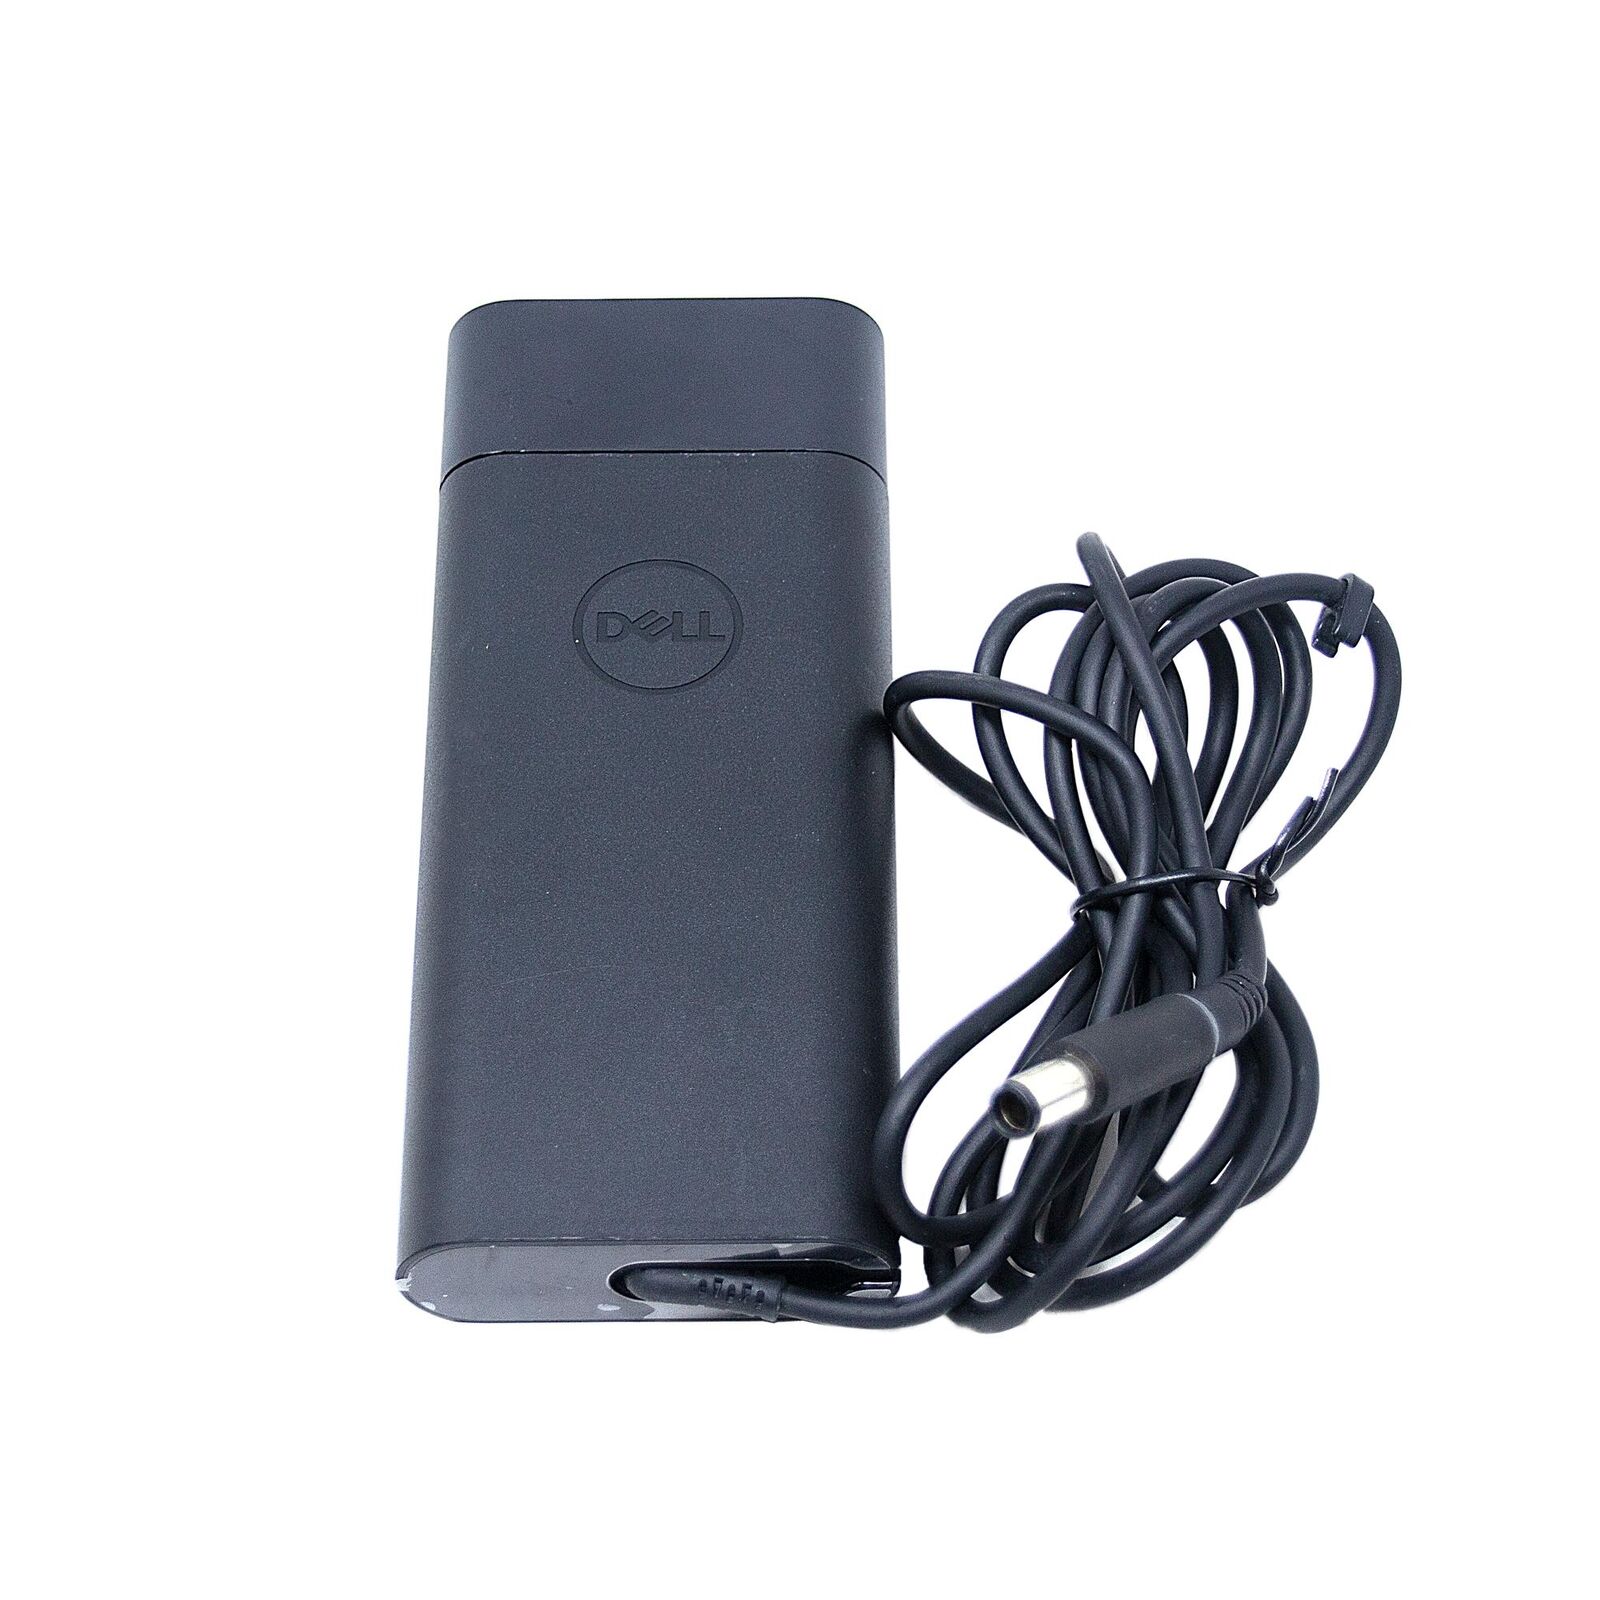 DELL 0FR613 19.5V 4.62A 90W Genuine Original AC Power Adapter Charger